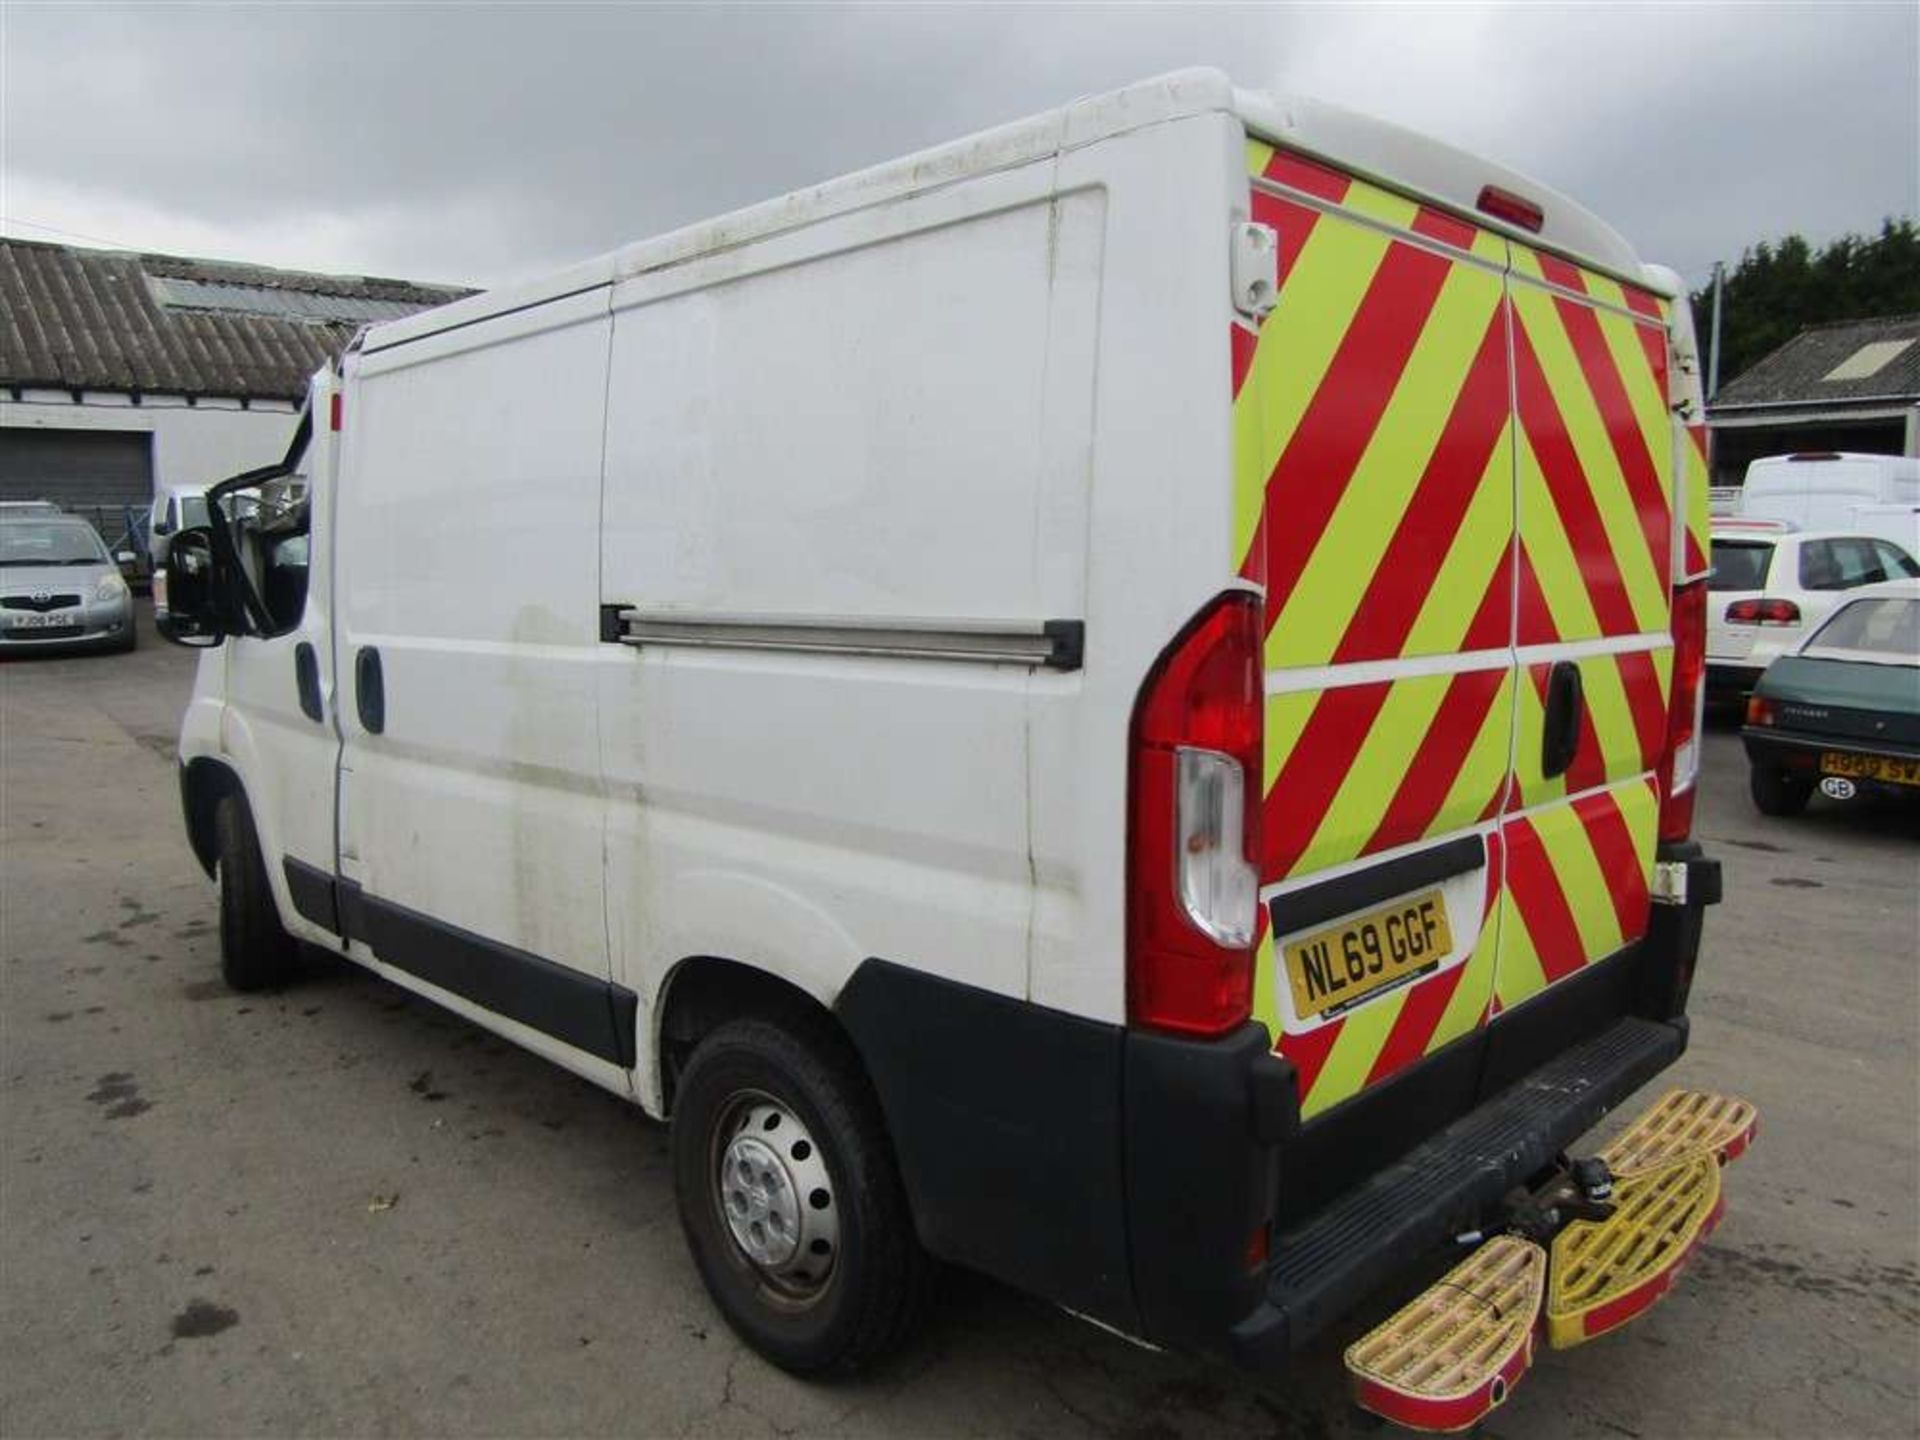 2019 69 reg Citroen Relay 33 L1H1 Eprise BHDI S/S (Runs/Drives CAT B-Spares Only) (Direct Council) - Image 3 of 7